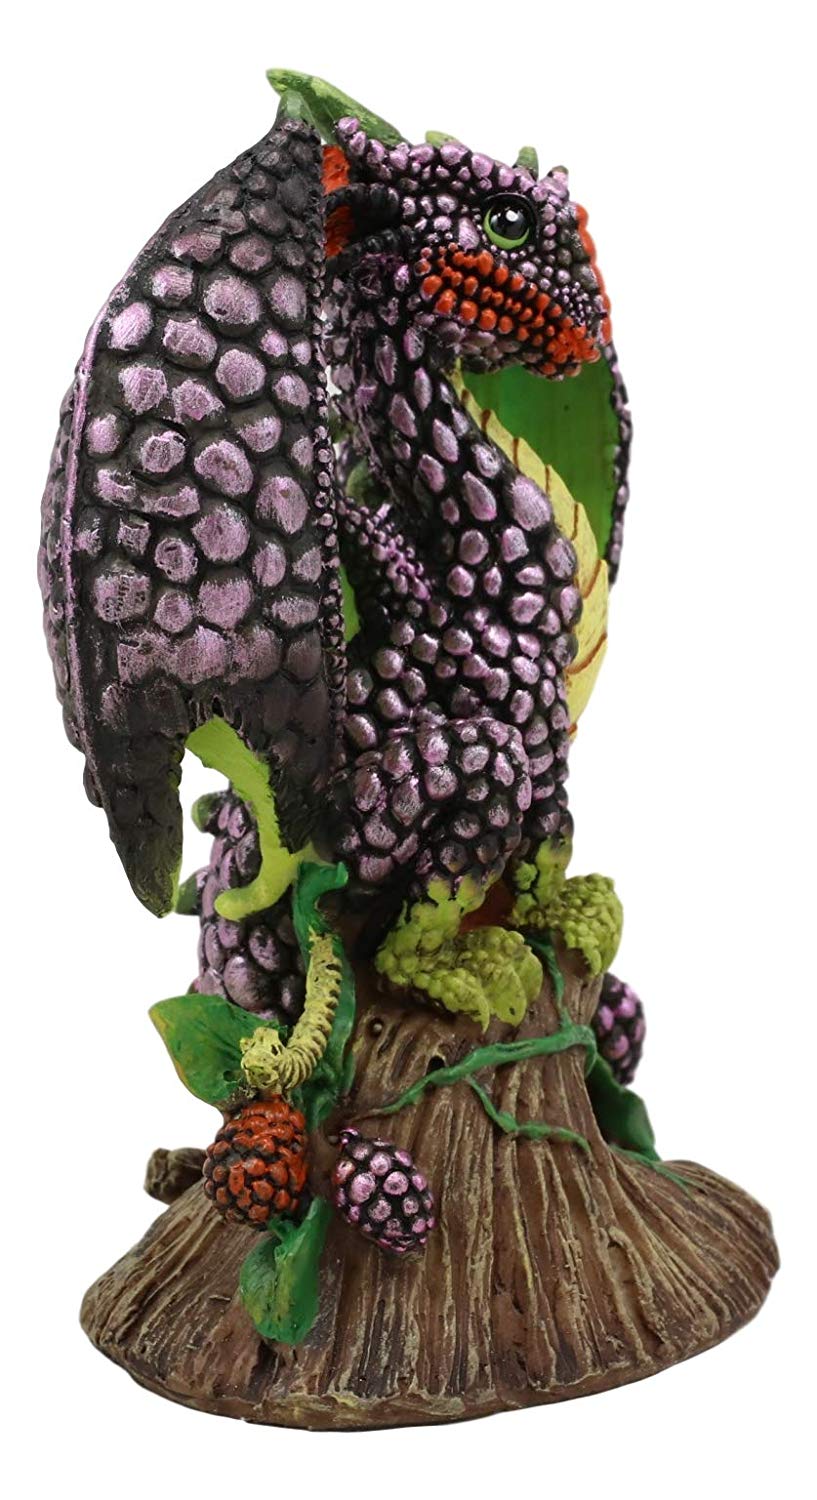 Ebros Colorful Fairy Garden Fruits And Berries Green Blackberry Dragon Statue - image 4 of 4